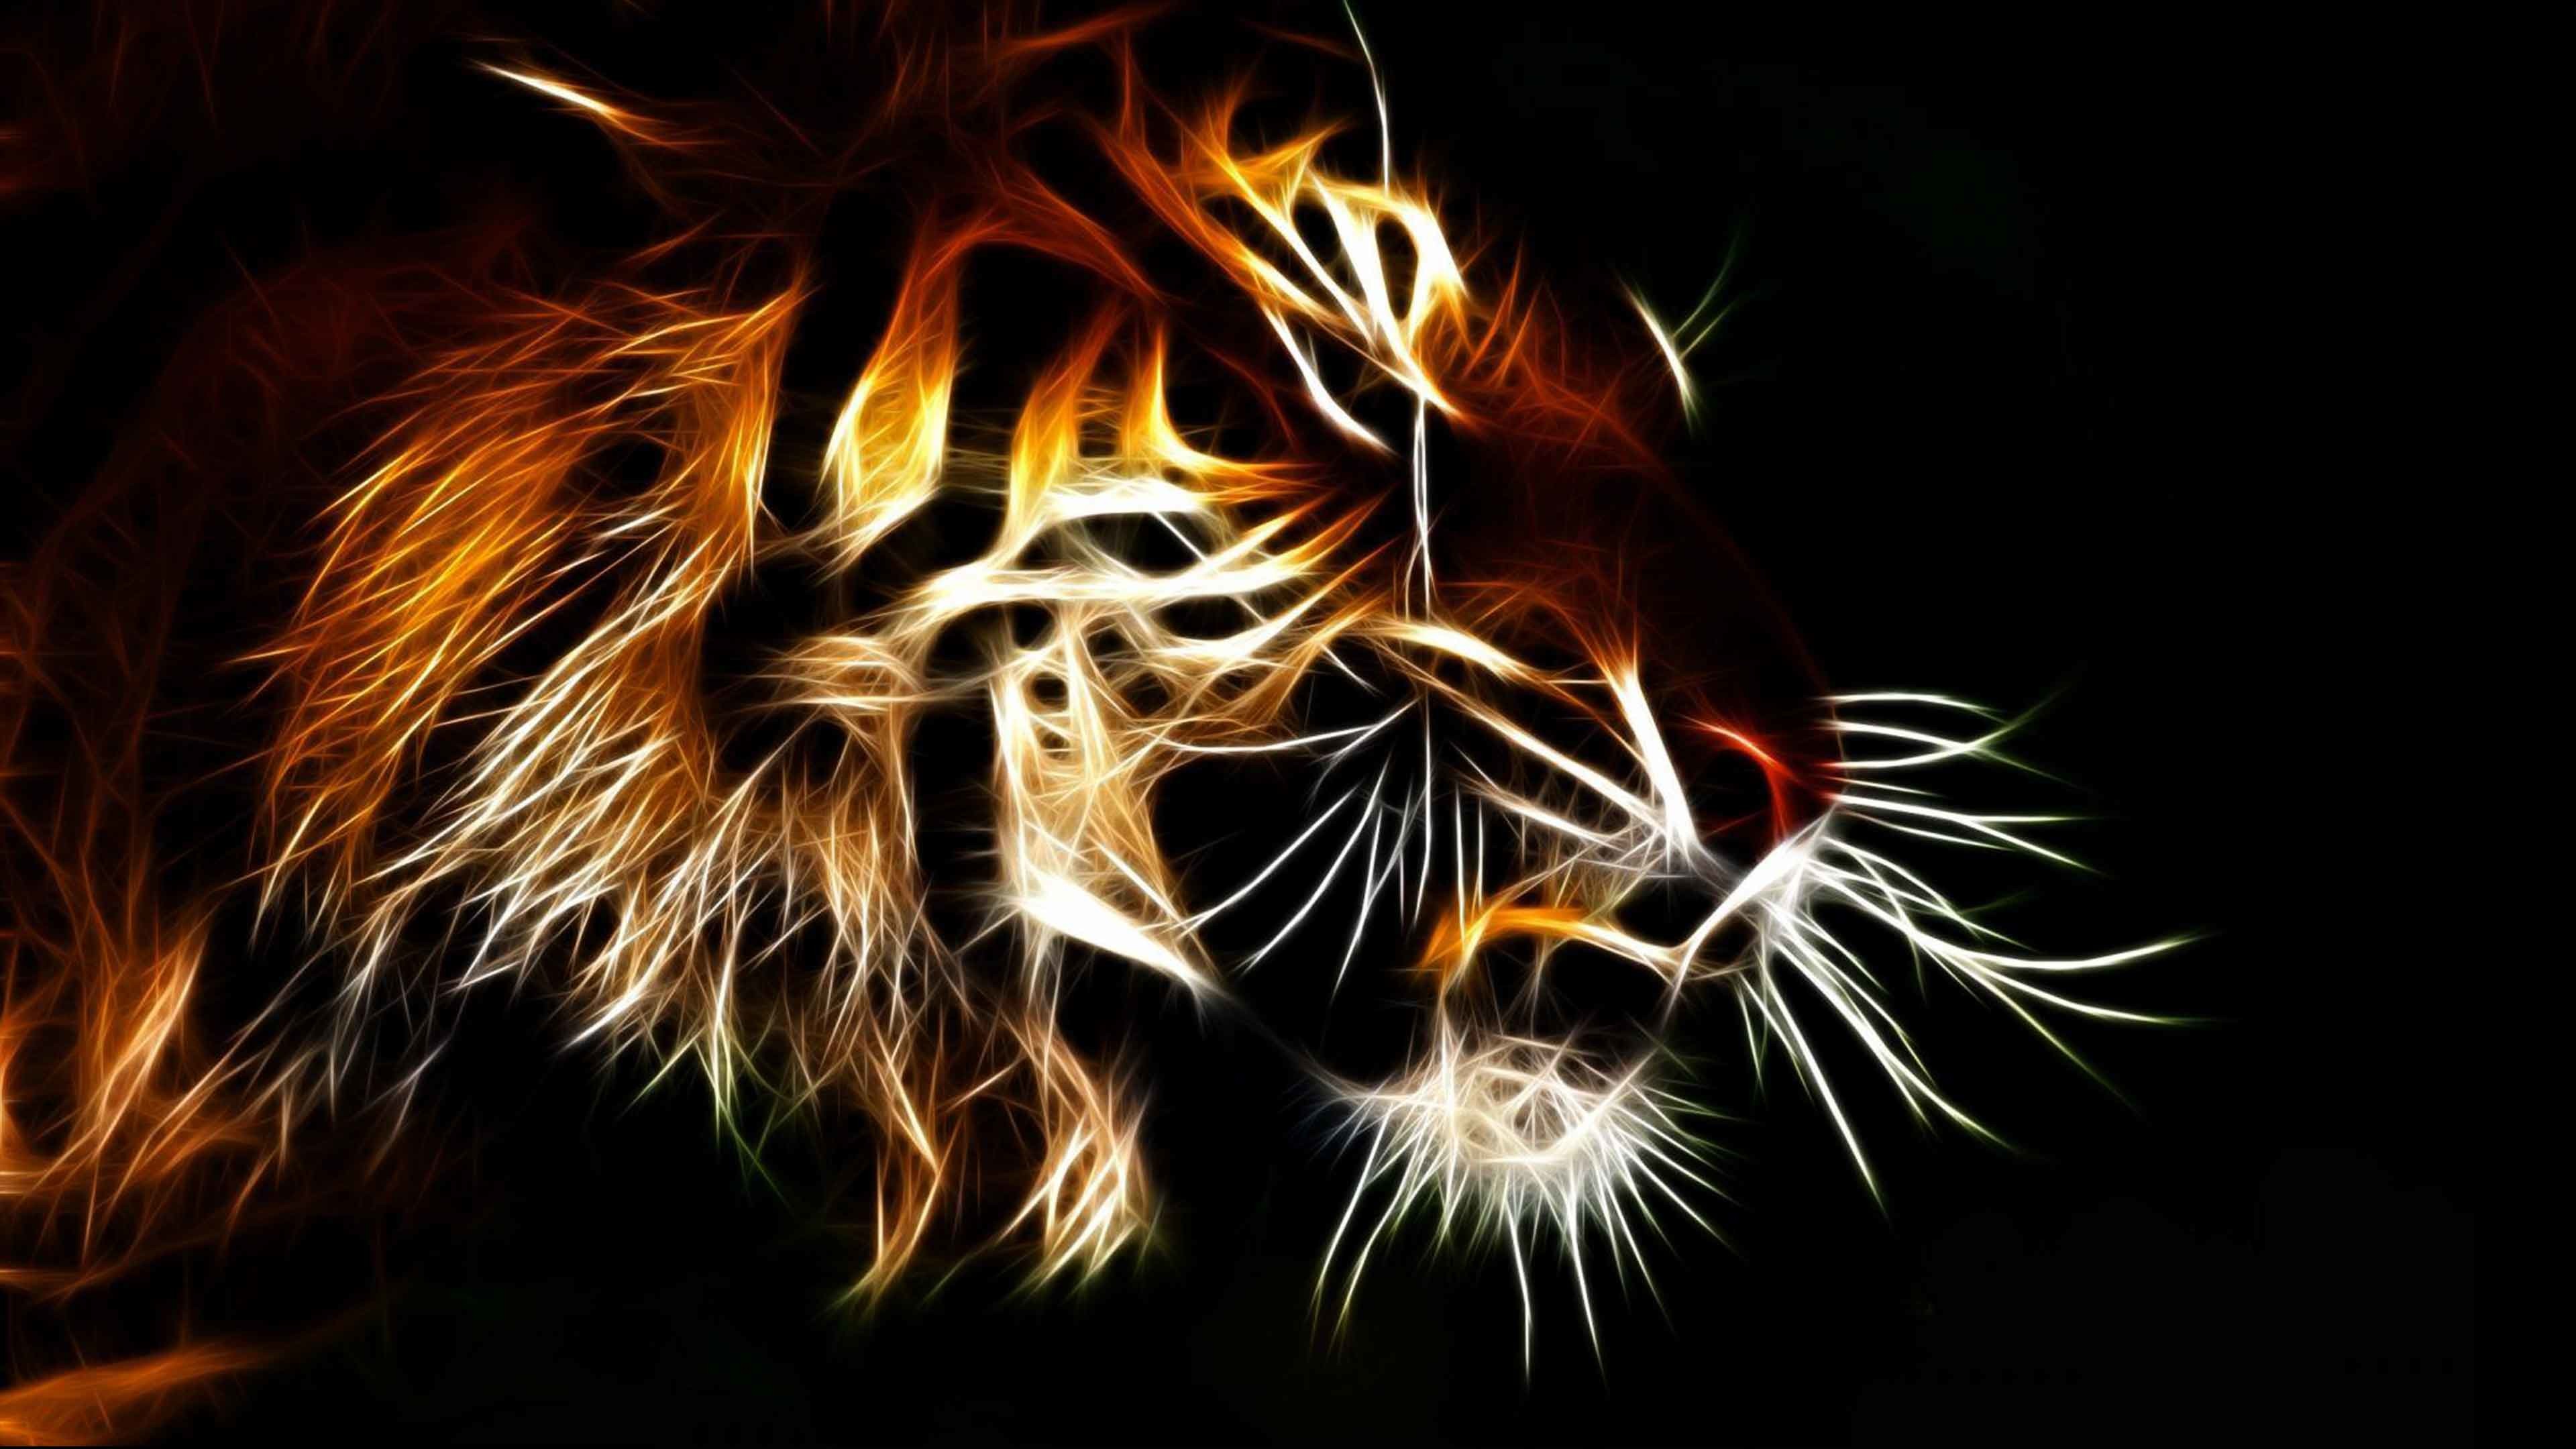 Wallpapers of Tigers (62+ pictures)